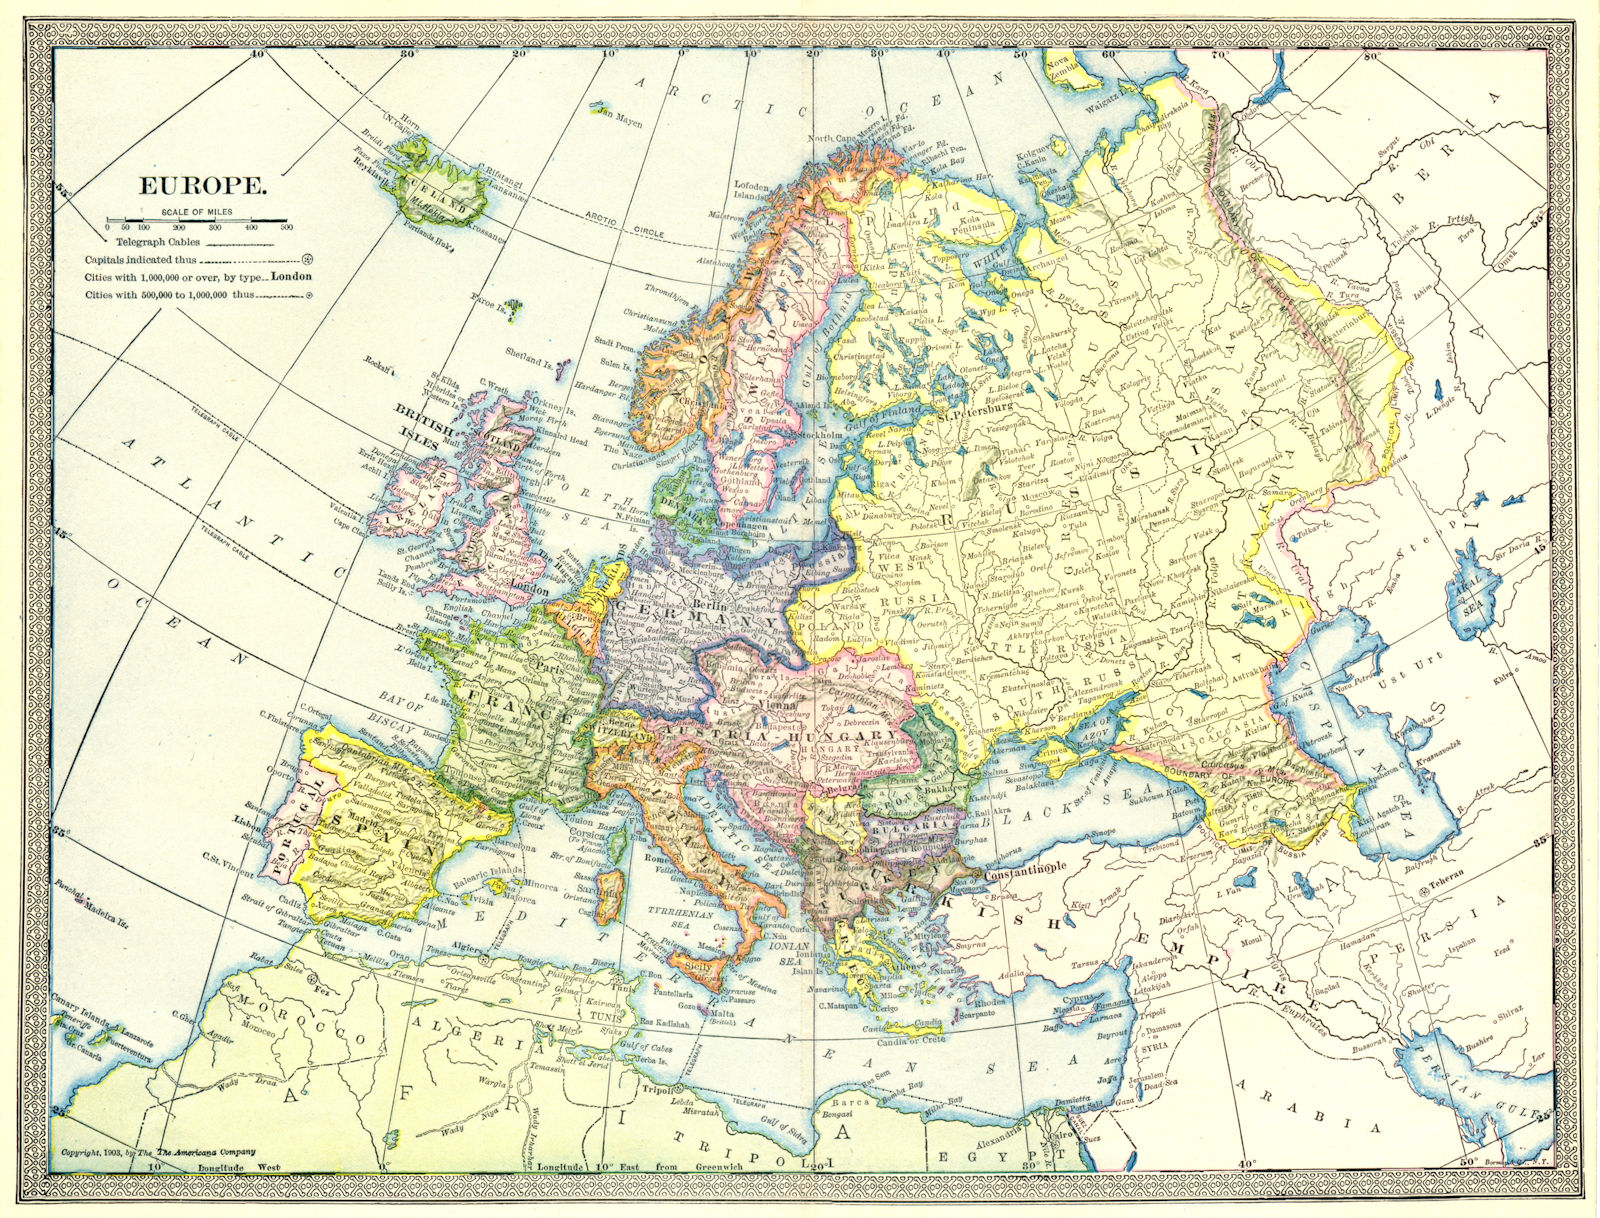 Associate Product EUROPE POLITICAL. Austria-Hungary. Turkey in Europe 1907 old antique map chart